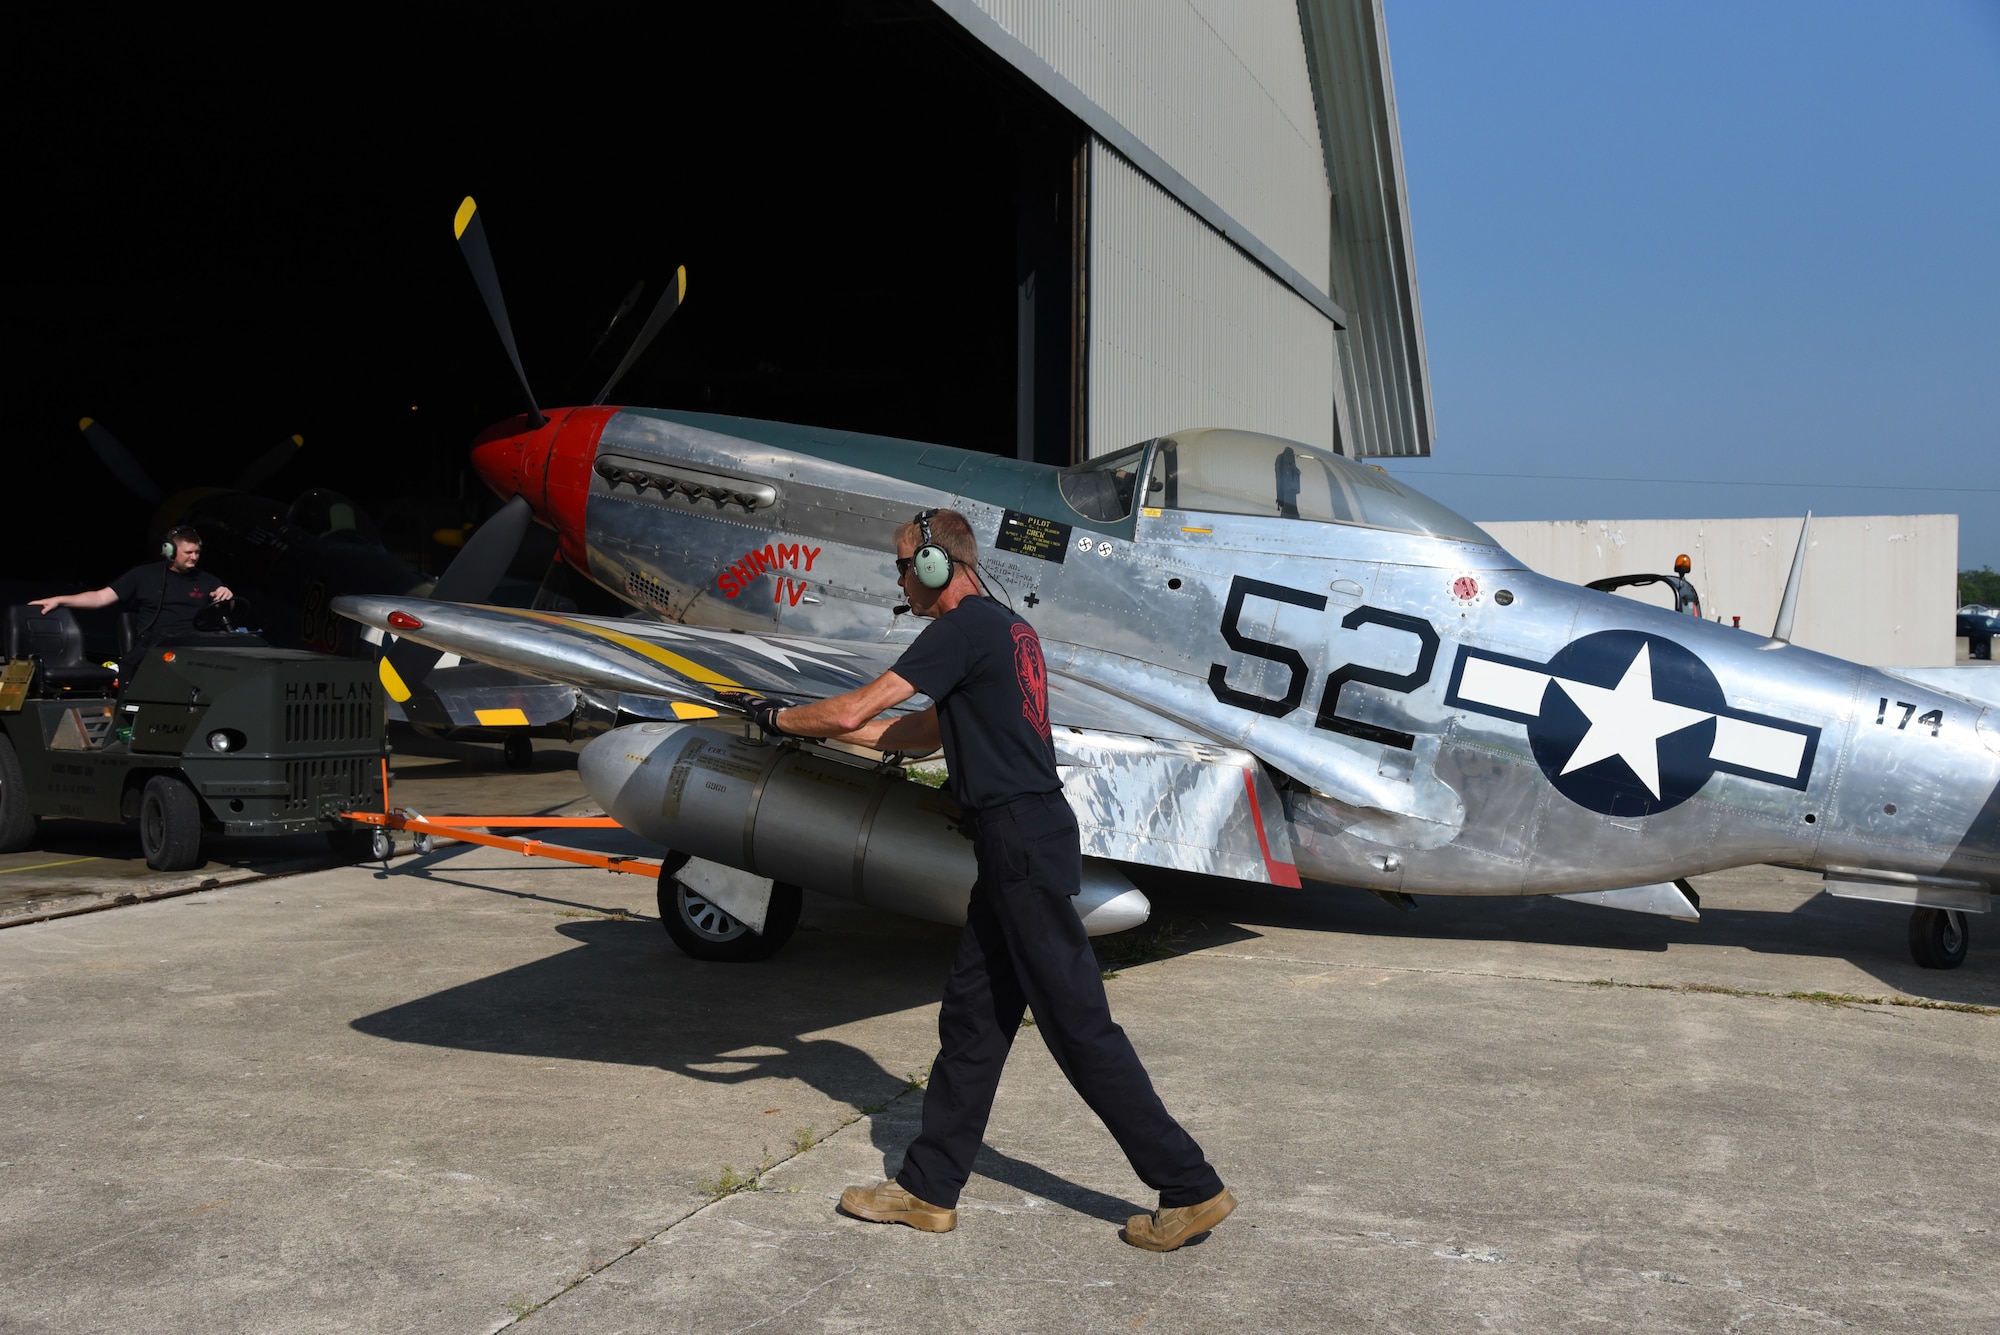 Museum restoration crews move the North American P-51D Mustang back into the WWII Gallery at the National Museum of the U.S. Air Force on Aug. 14, 2018. Several WWII era aircraft were temporarily placed throughout the museum to provide adequate space for the Memphis Belle exhibit opening events. (U.S. Air Force photo by Ken LaRock)